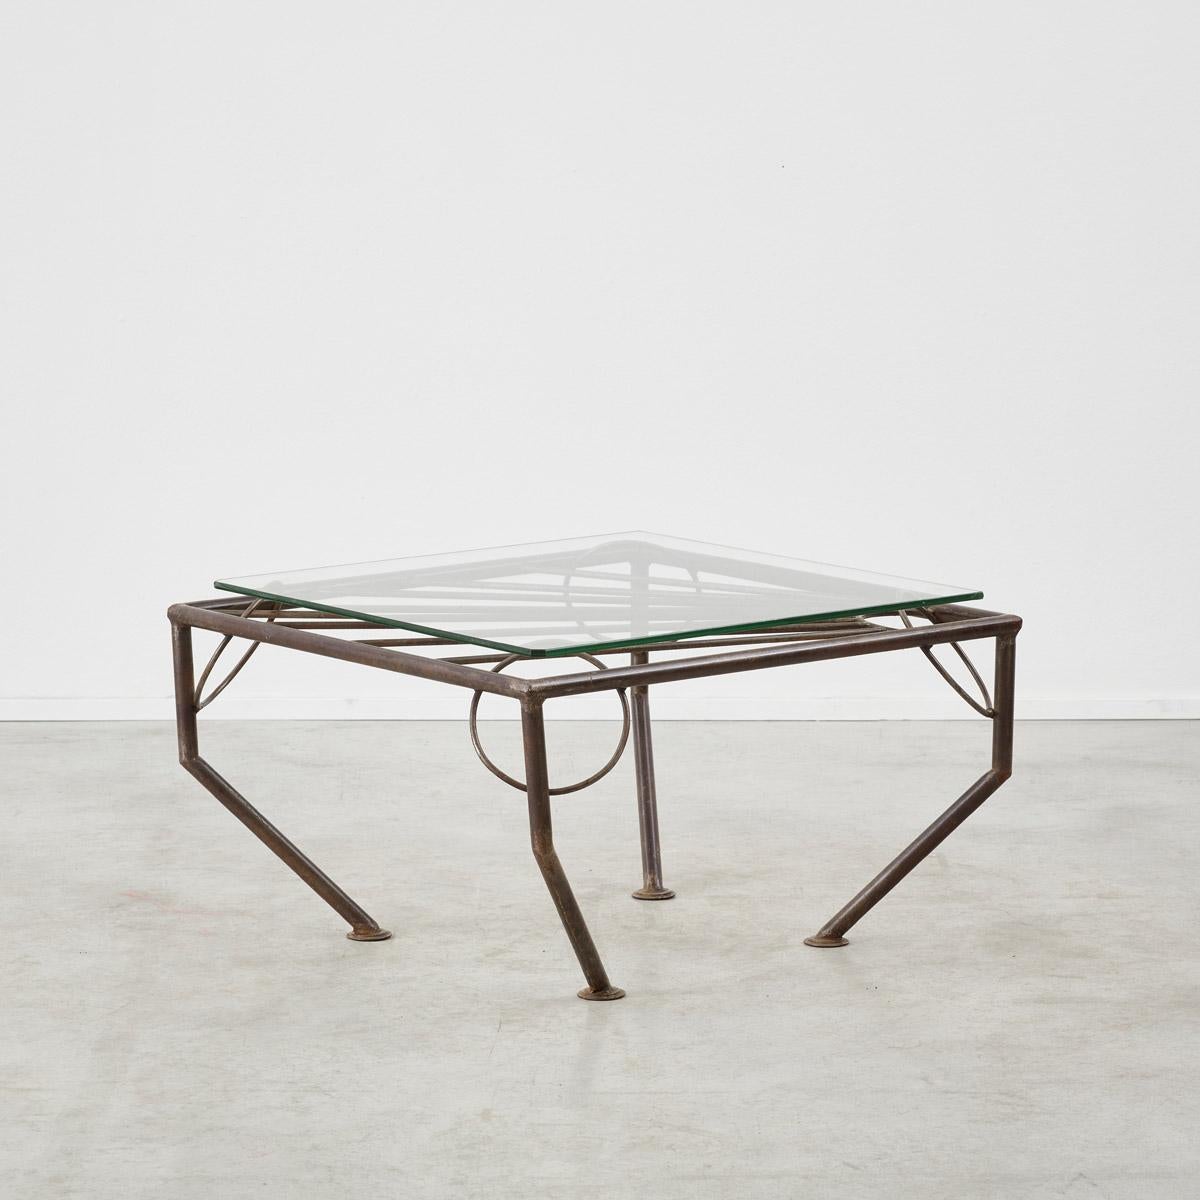 Beaming out like a sunburst, this forged metal coffee table has a dynamic shape. The glass is balanced upon four protruding rings, which despite its precarious look sits firmly in place. 

The metal base has a lovely oxidised patina. The glass top